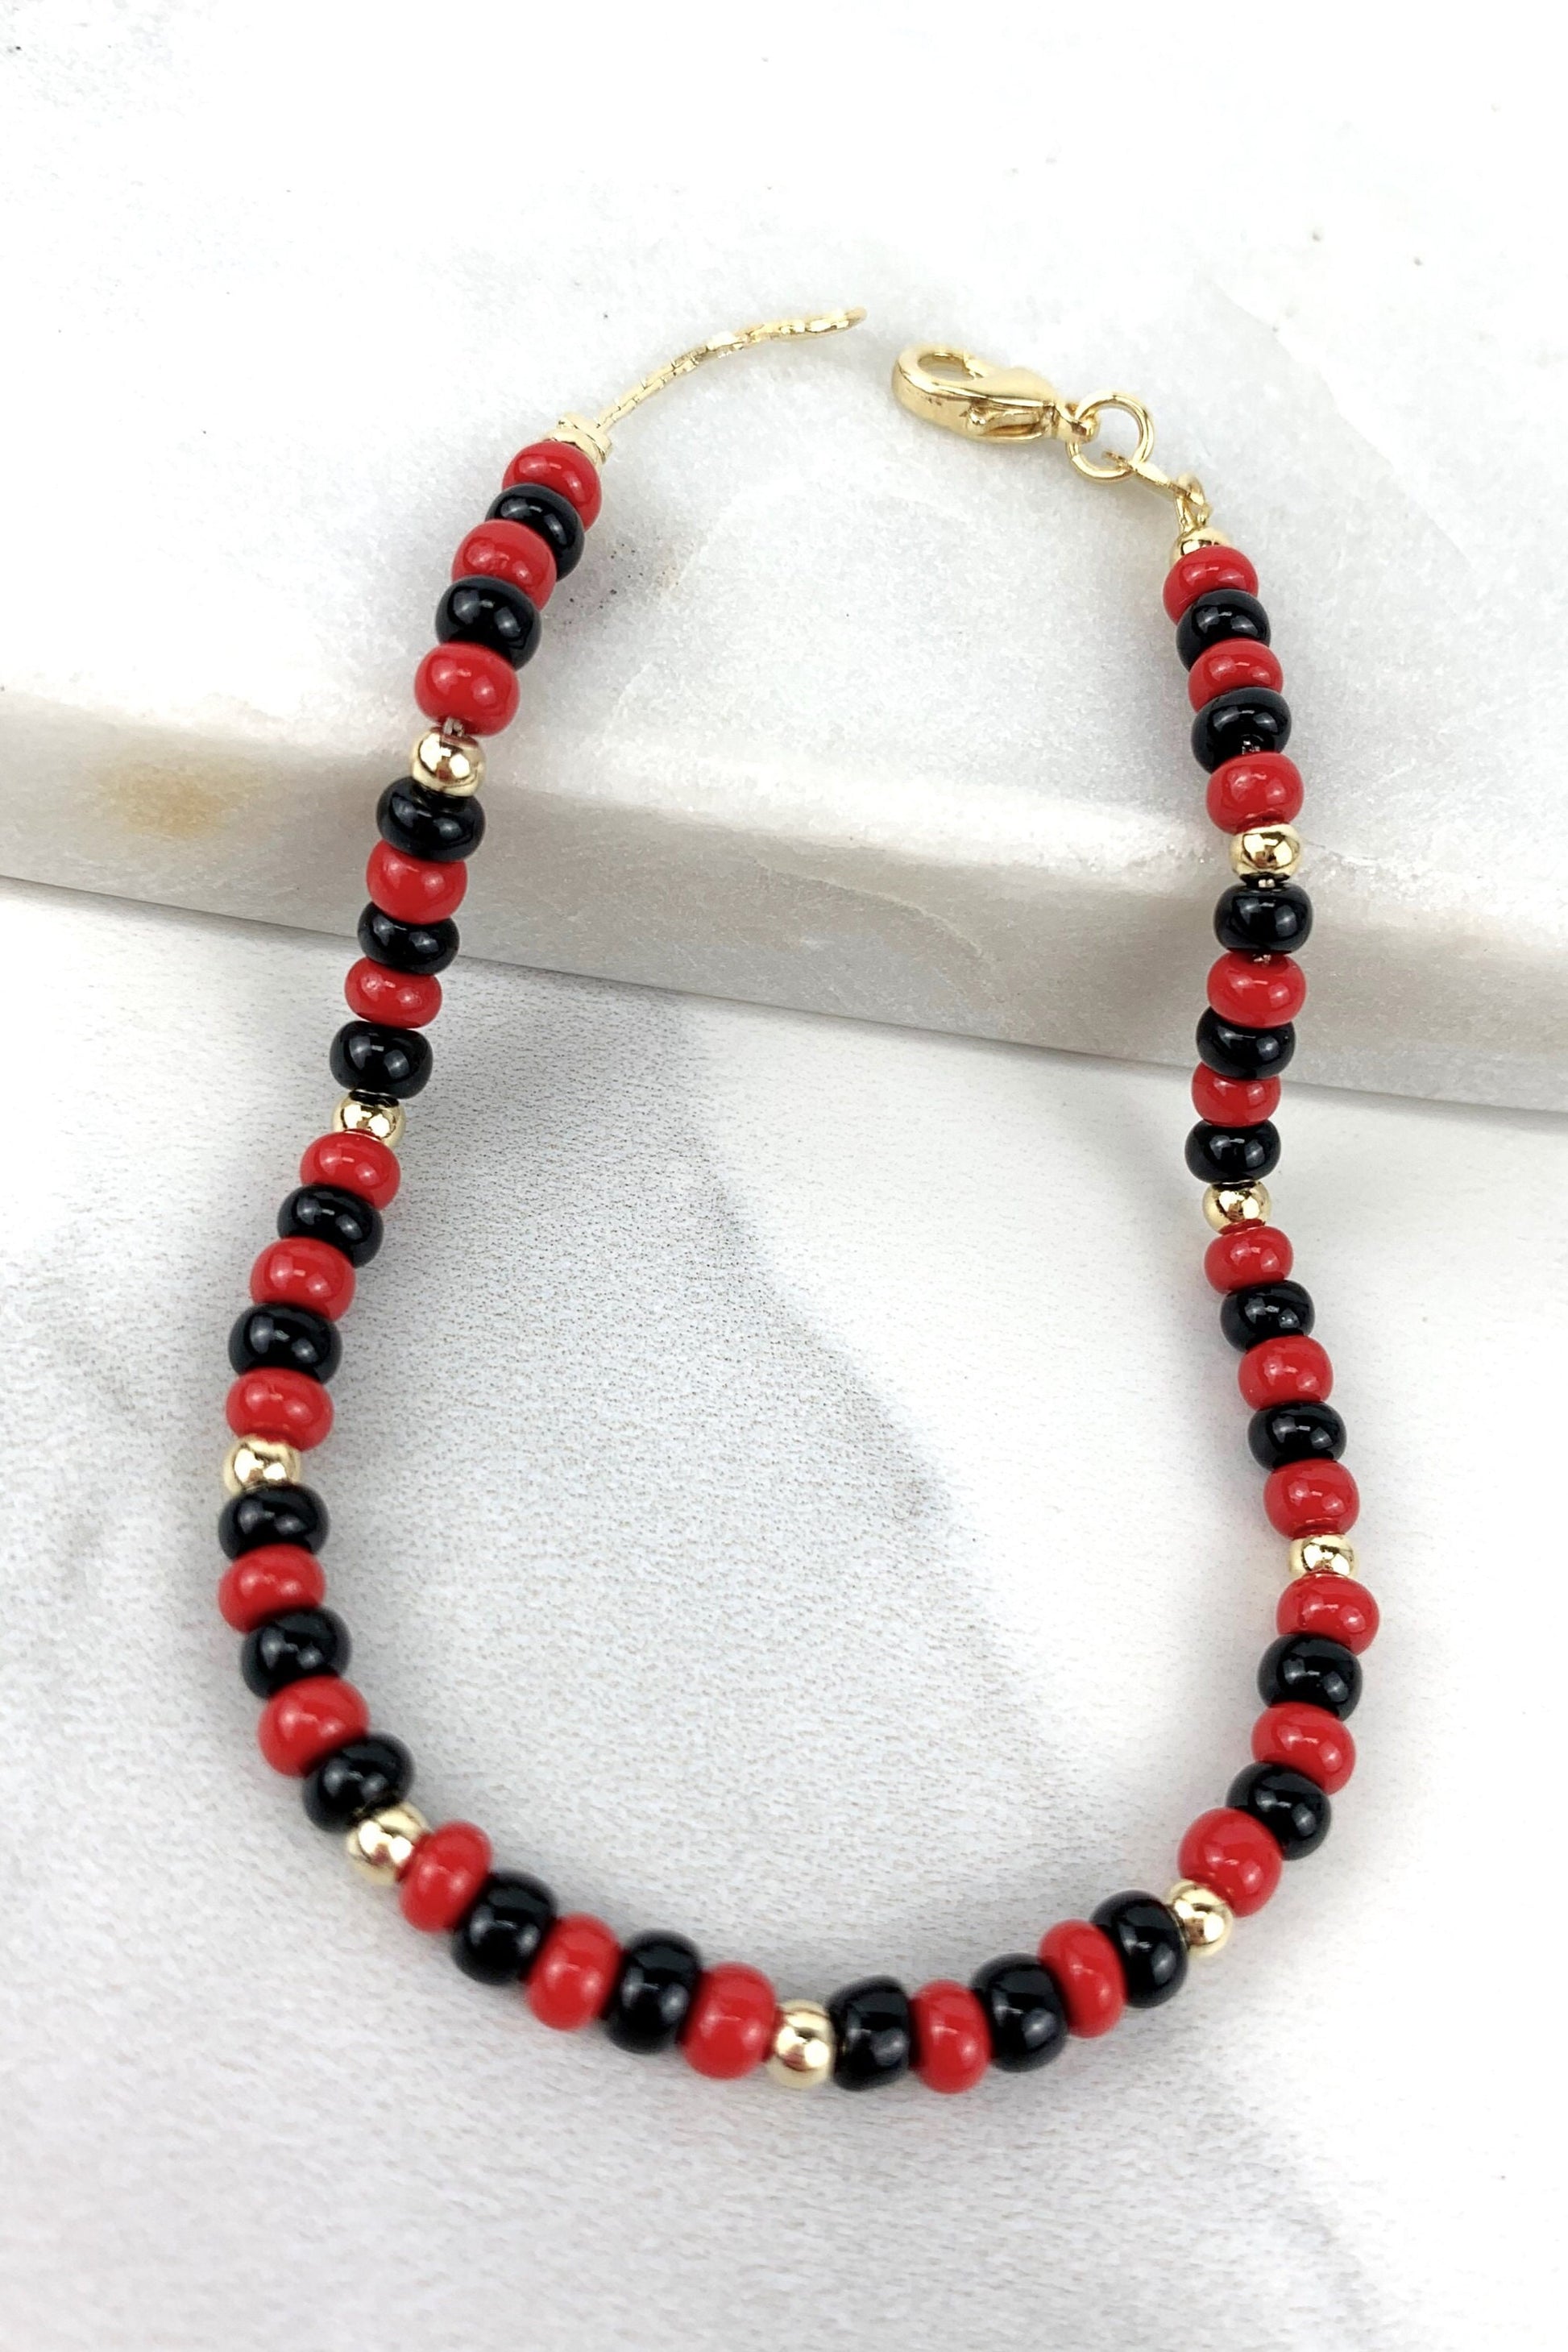 Mommy and Me Matching Jewelry | 18k Gold Filled Figaro Link Id Kids Bracelet or Black Red Beads Mother Bracelet Wholesale Jewelry Supplies